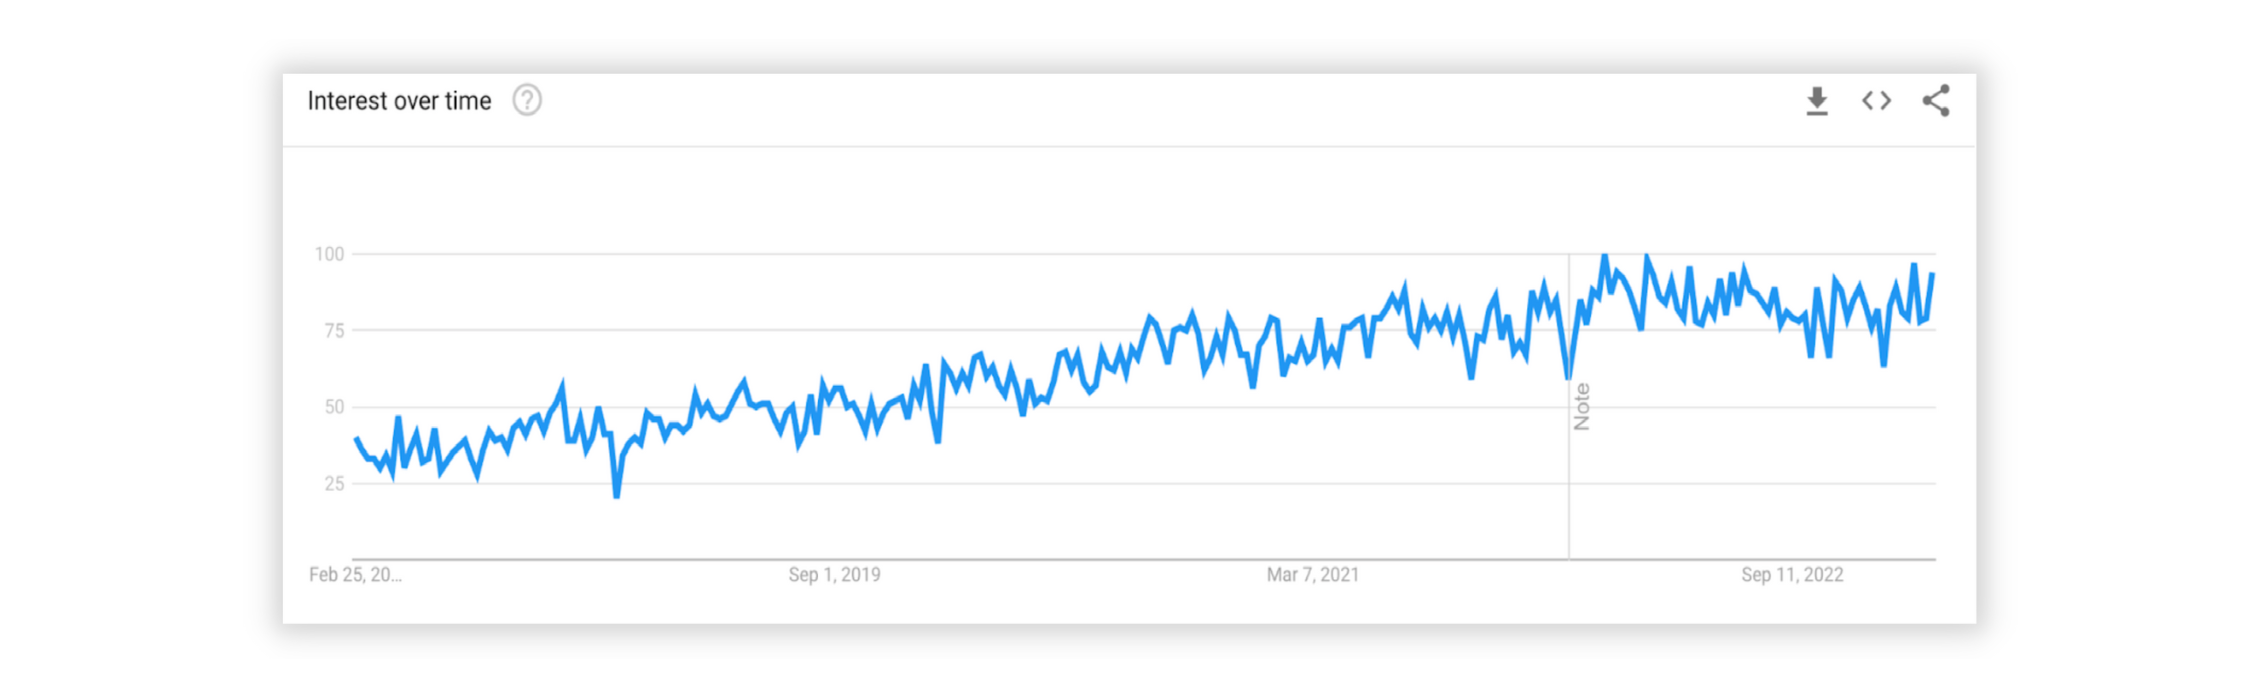 Google Trends chart for the product development trend "cloud migration"